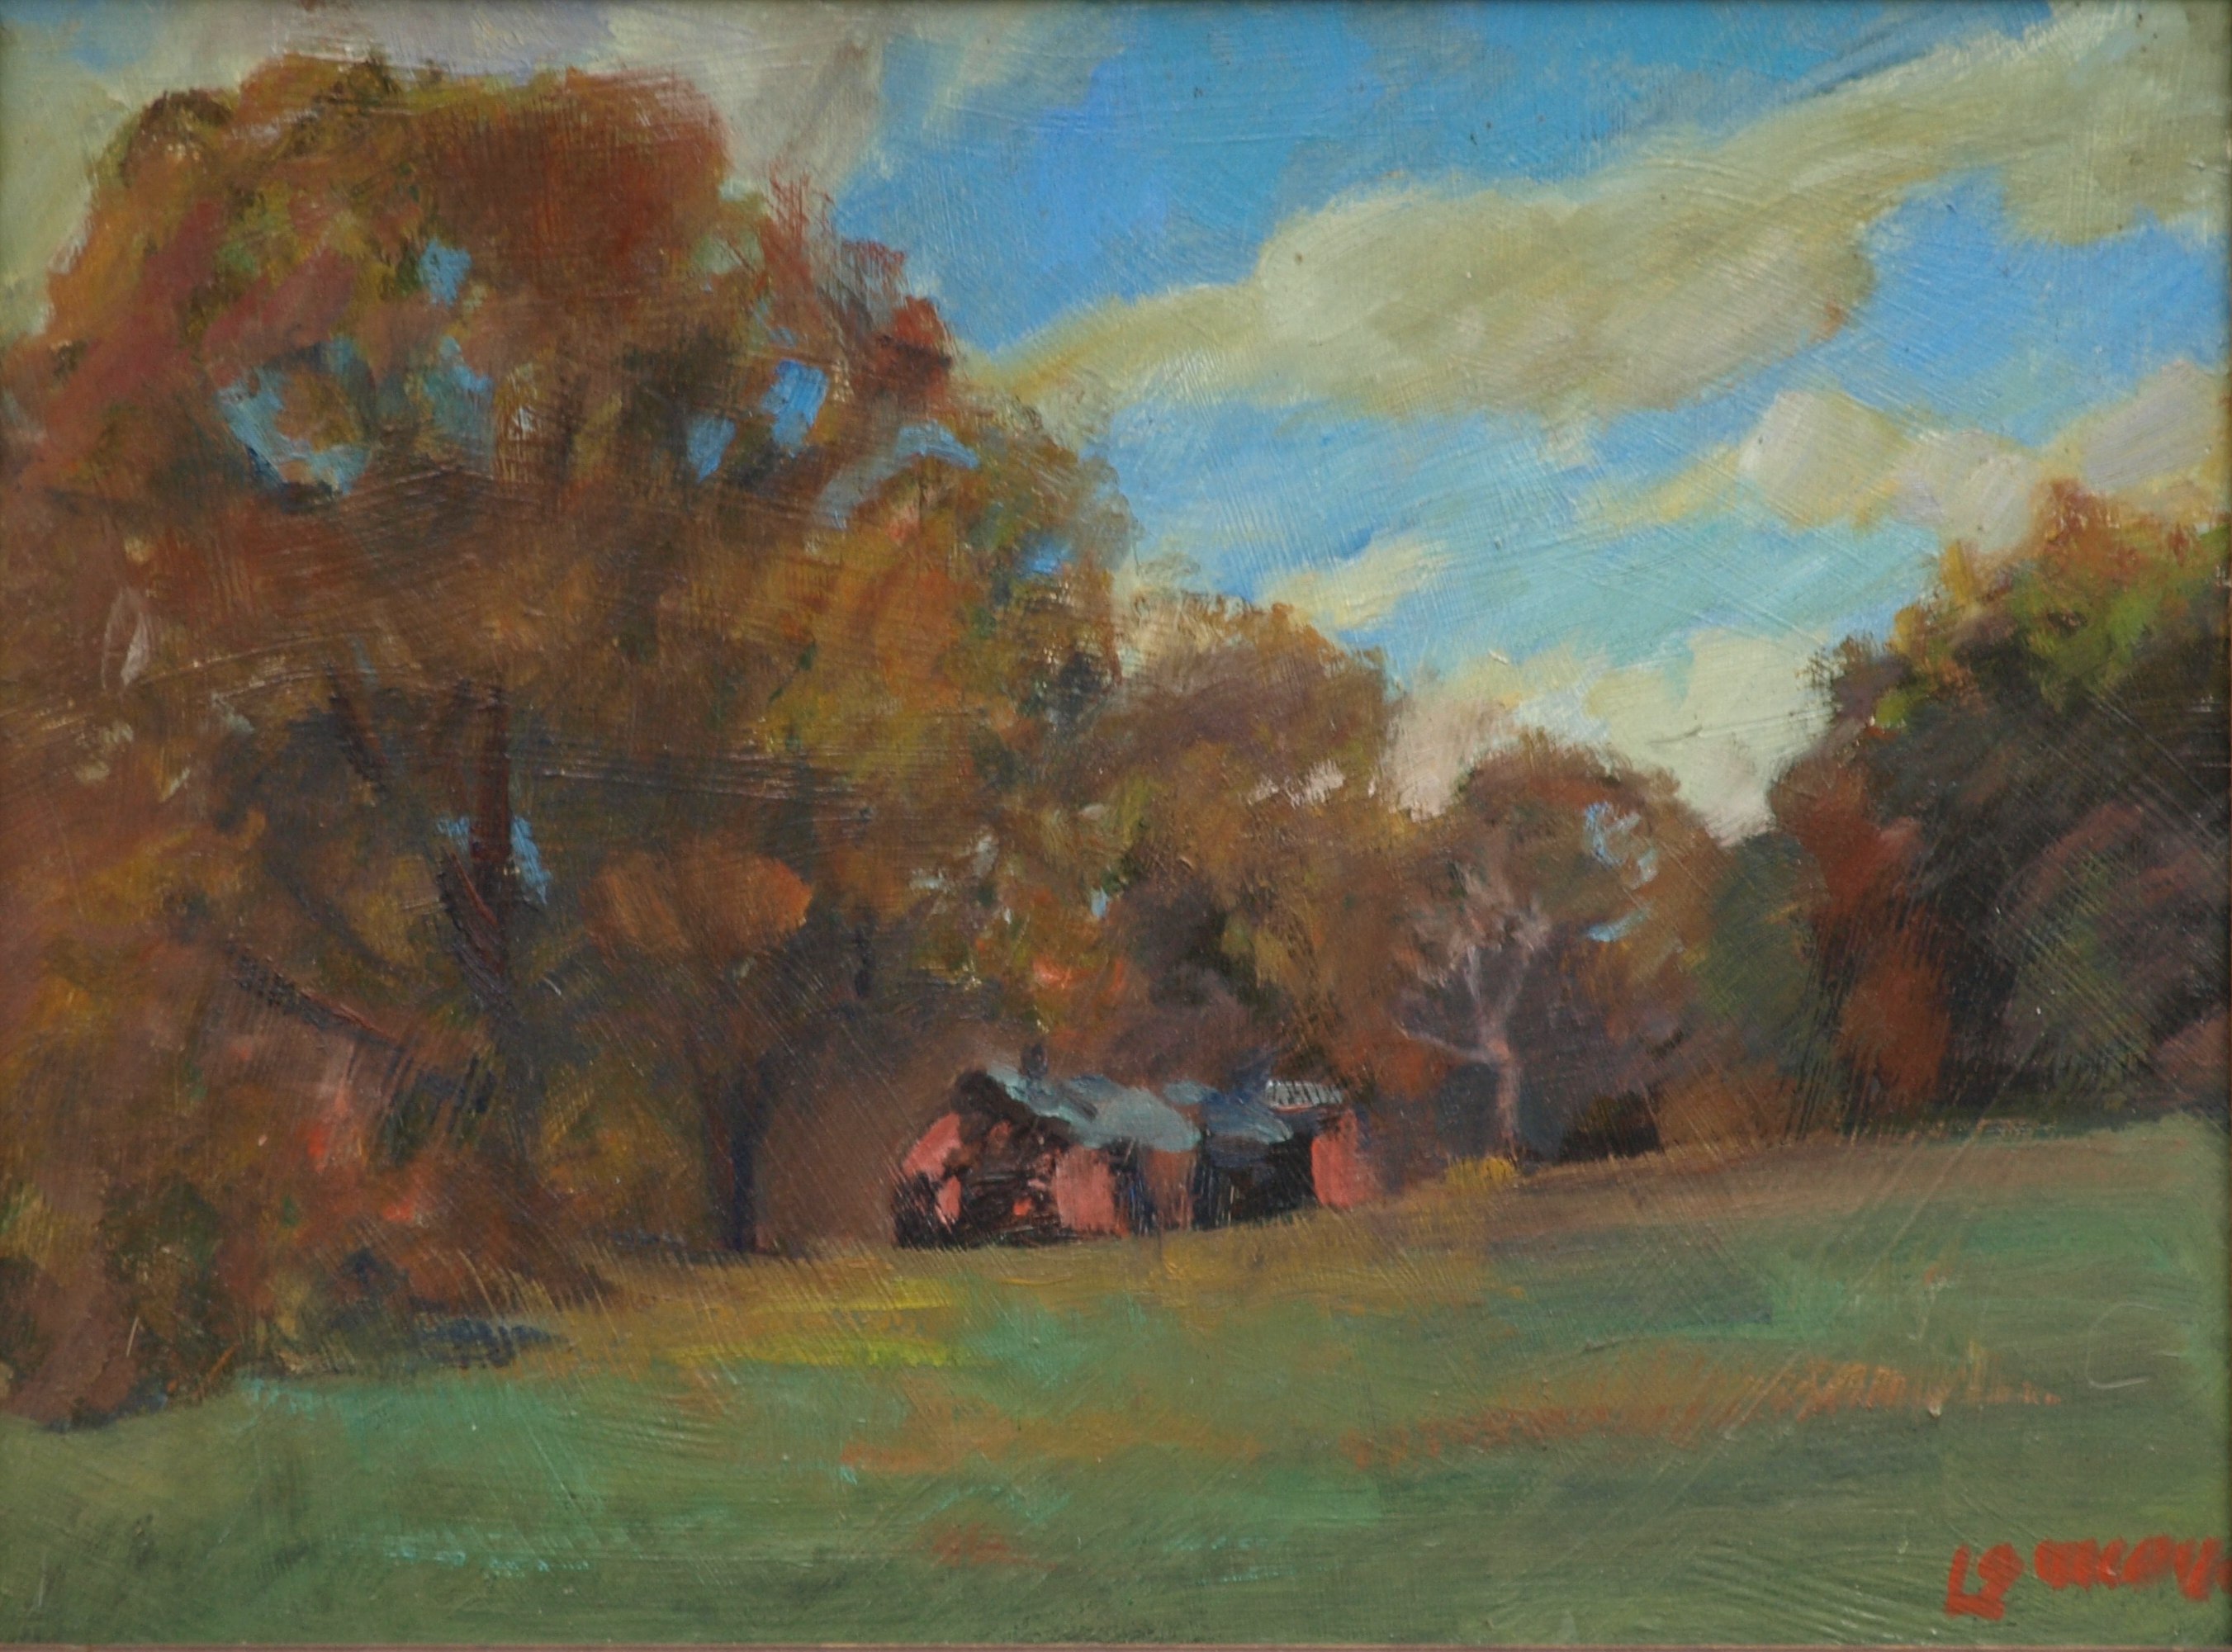 Brown's Forge - Autumn, Oil on Panel, 12 x 16 Inches, by Bernard Lennon, $300